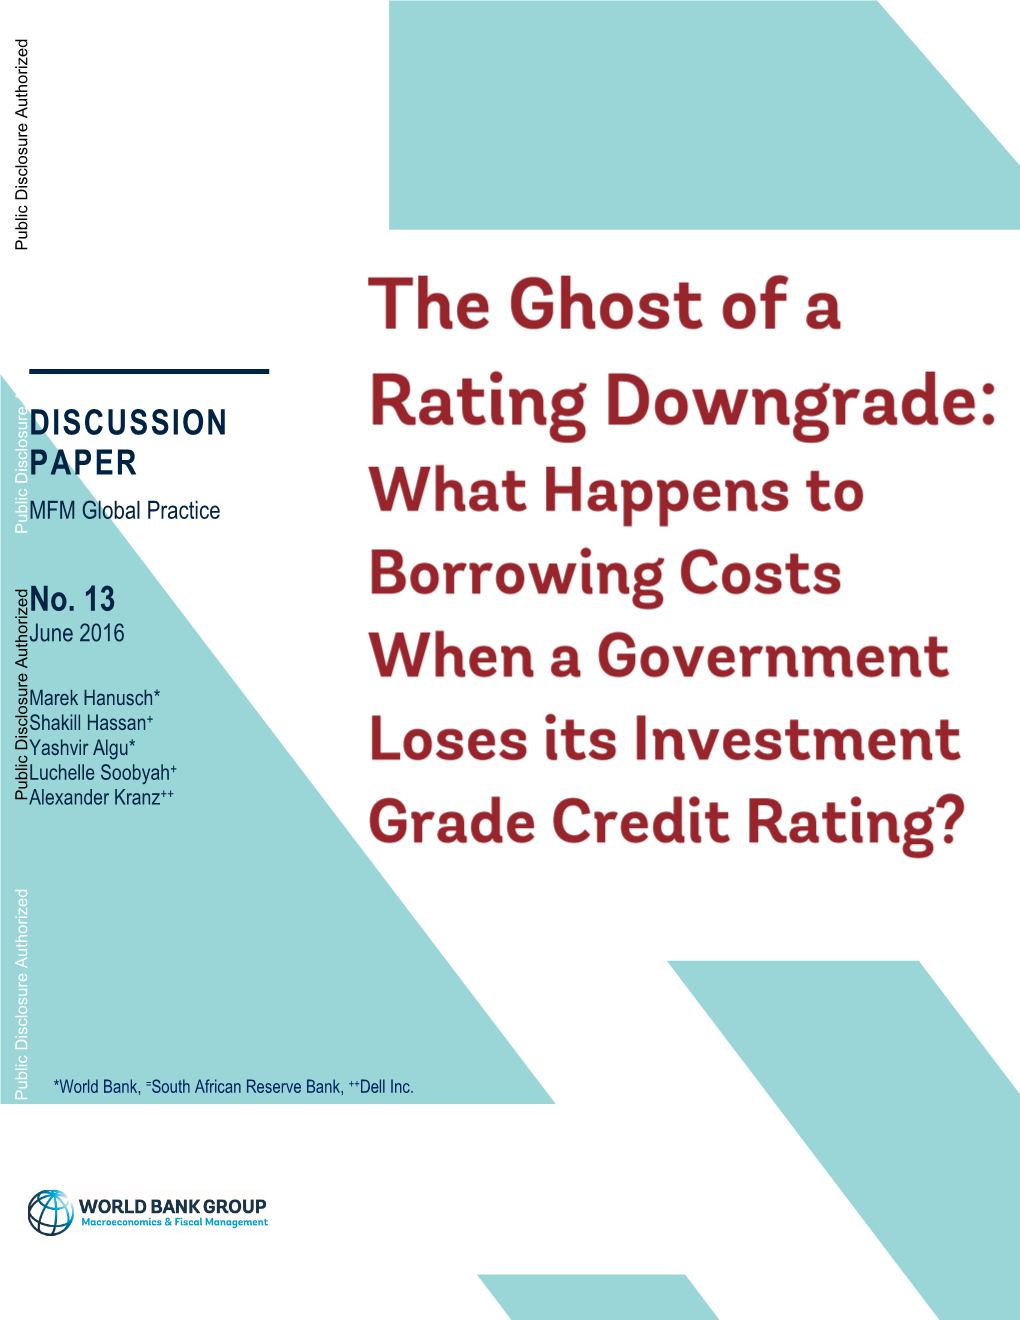 The Ghost of a Rating Downgrade: What Happens to Borrowing Costs When a Government Loses Its Investment Grade Credit Rating? ∗